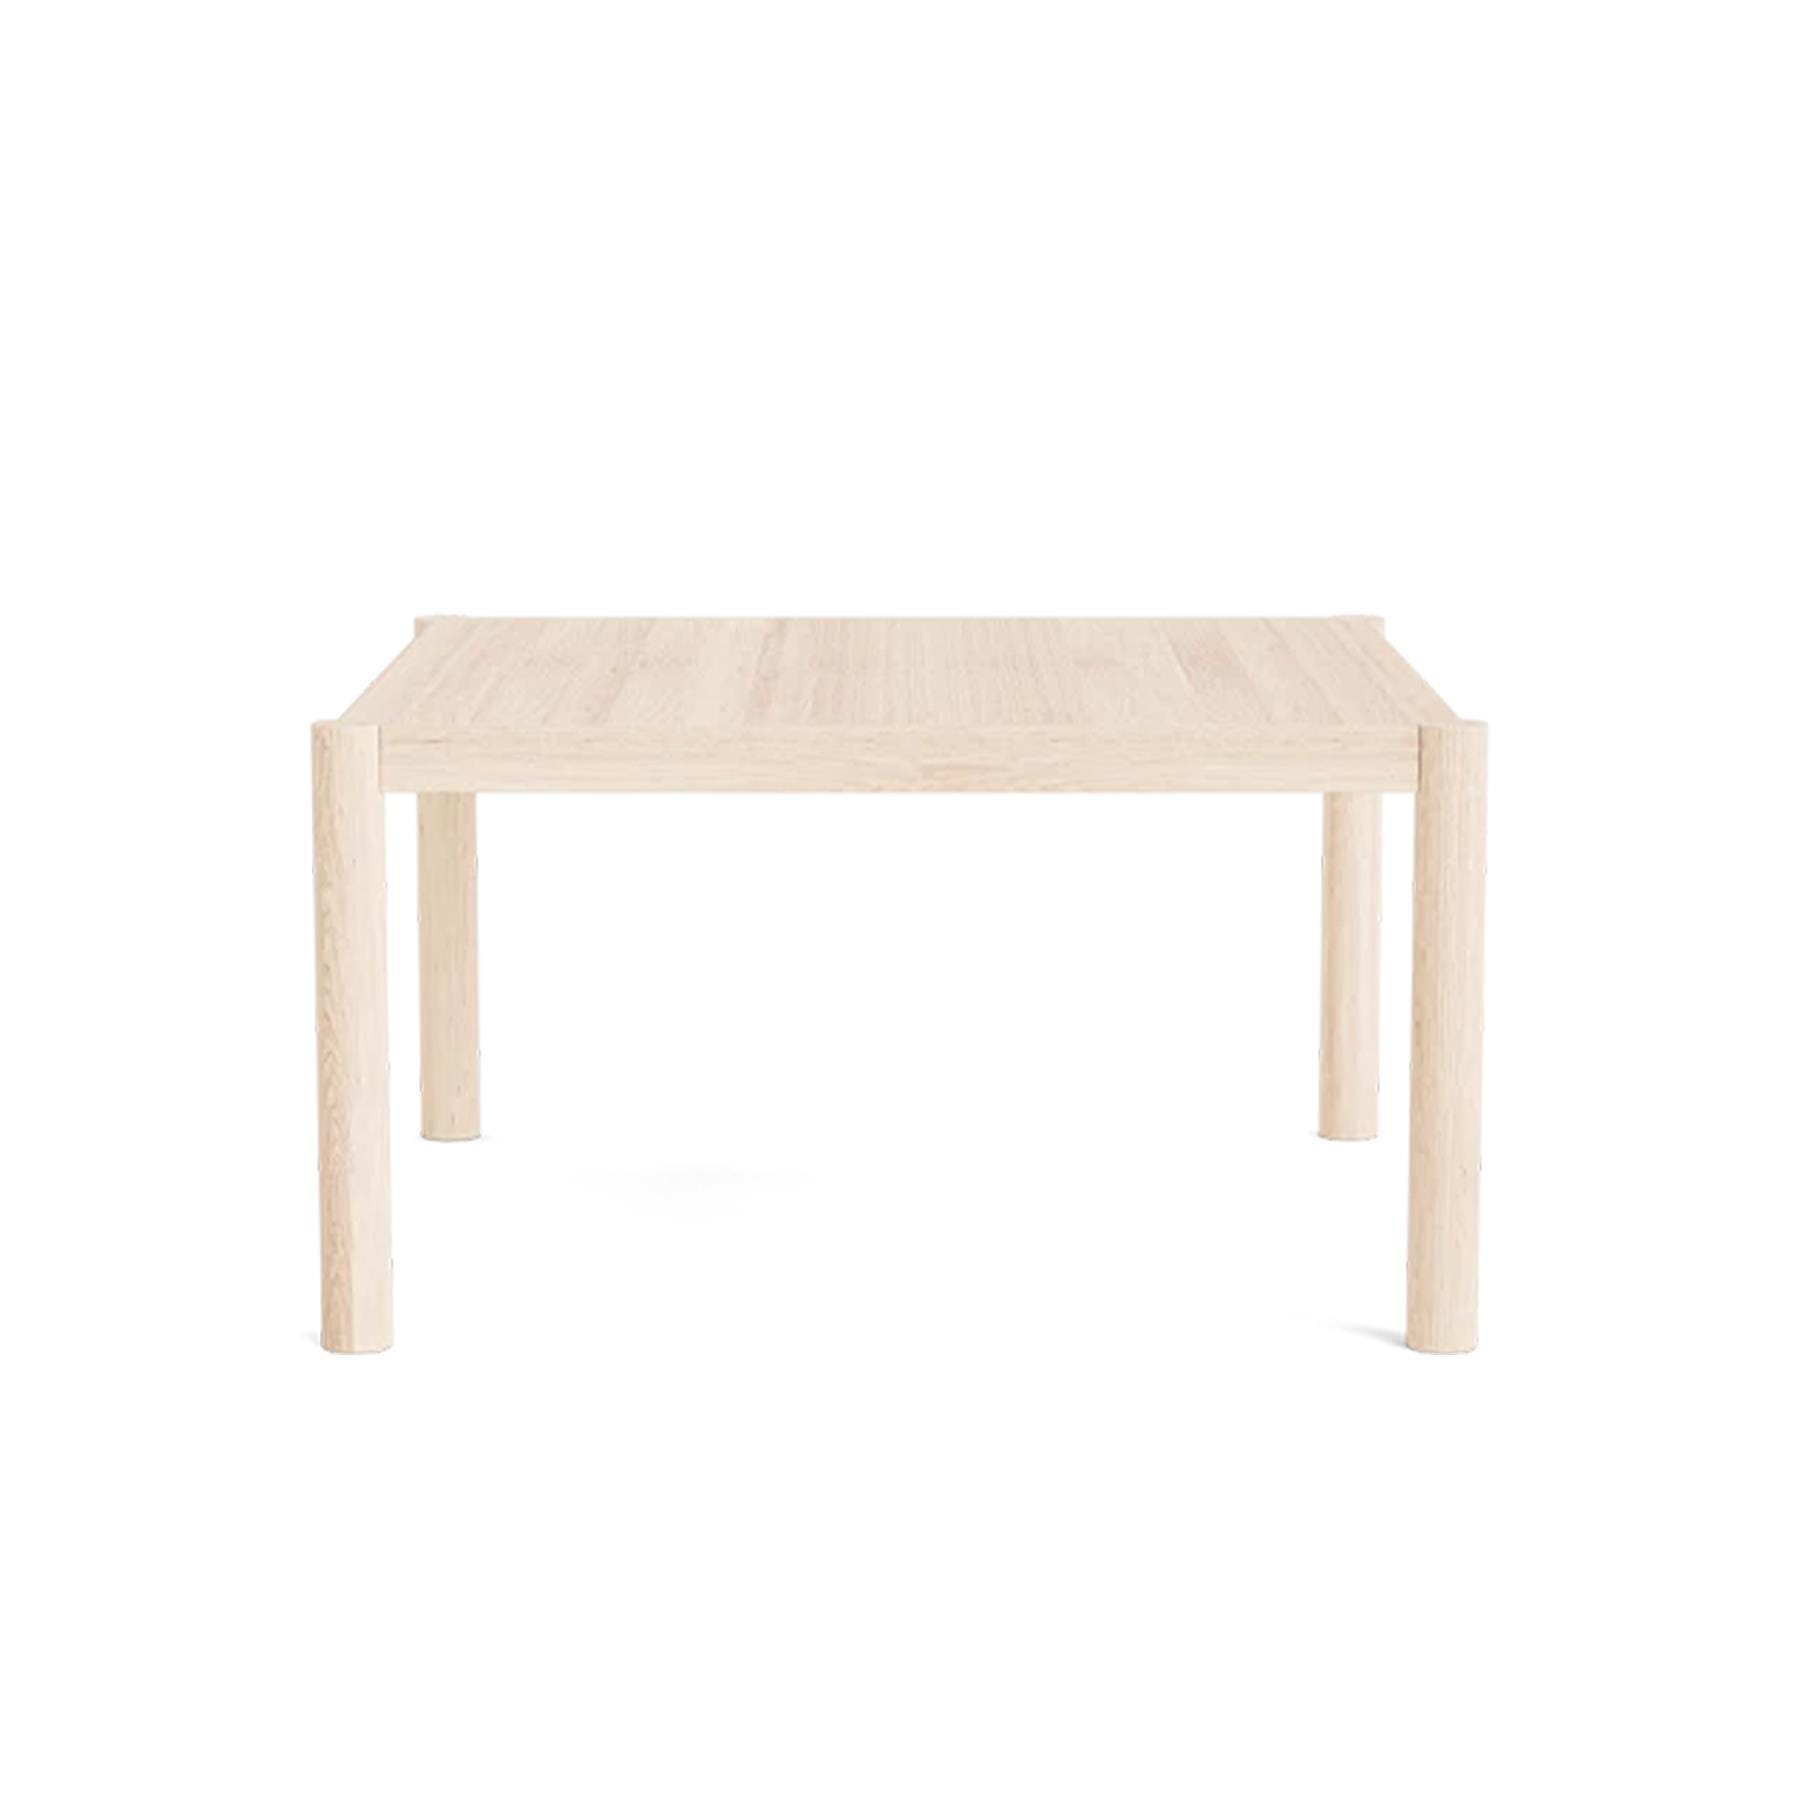 Make Nordic Tammi Coffee Table Square Height 45cm Oak White Oil Light Wood Designer Furniture From Holloways Of Ludlow